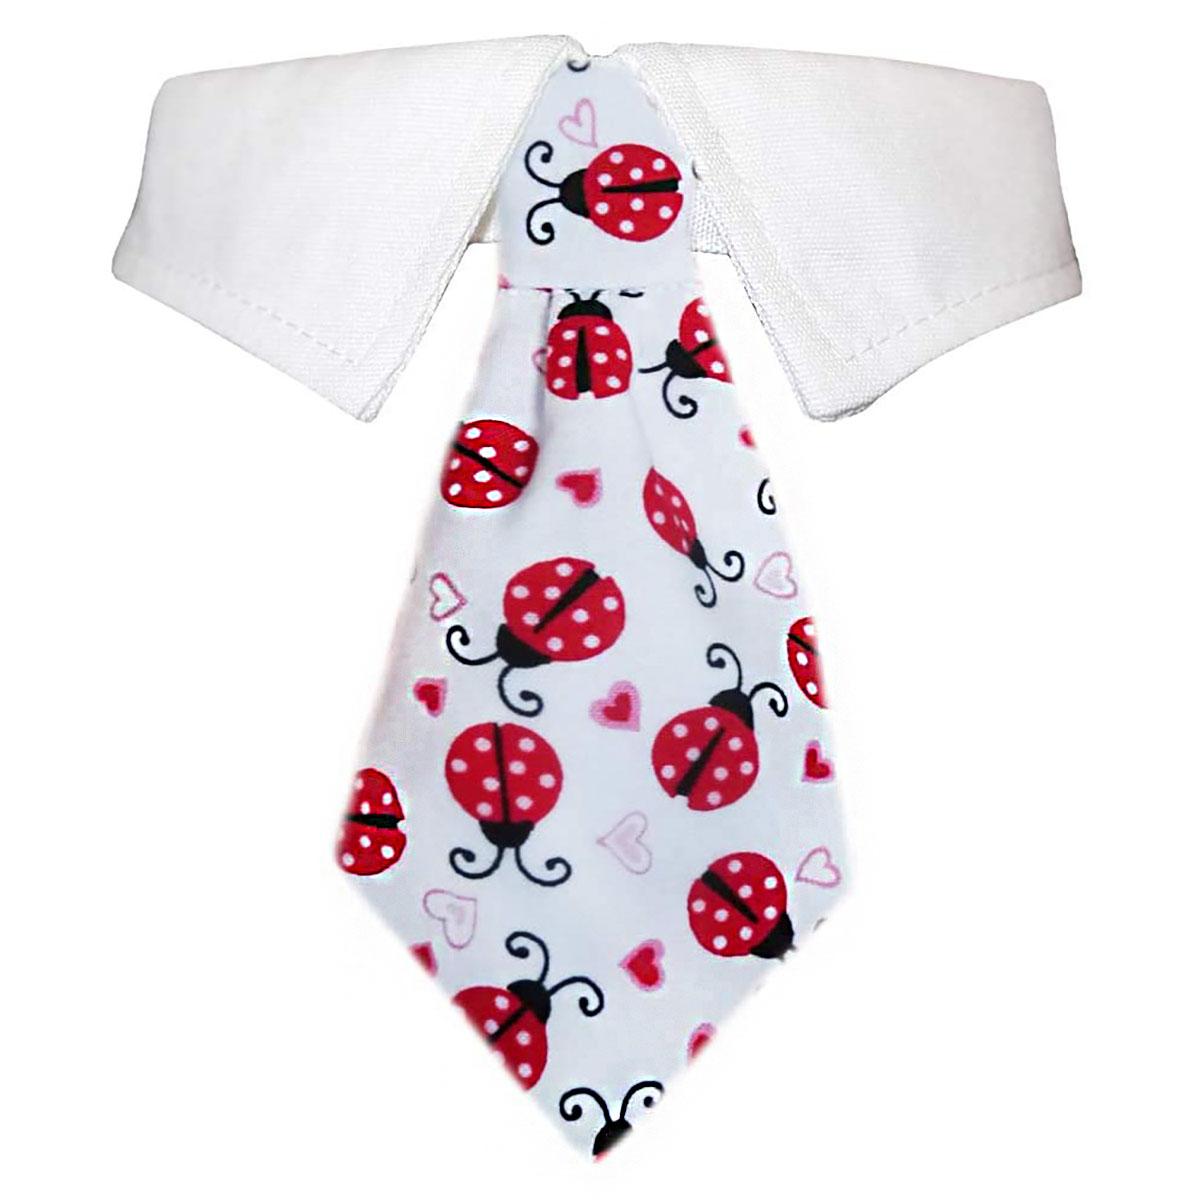 Pooch Outfitters Lady Bug Dog Shirt Collar and Tie